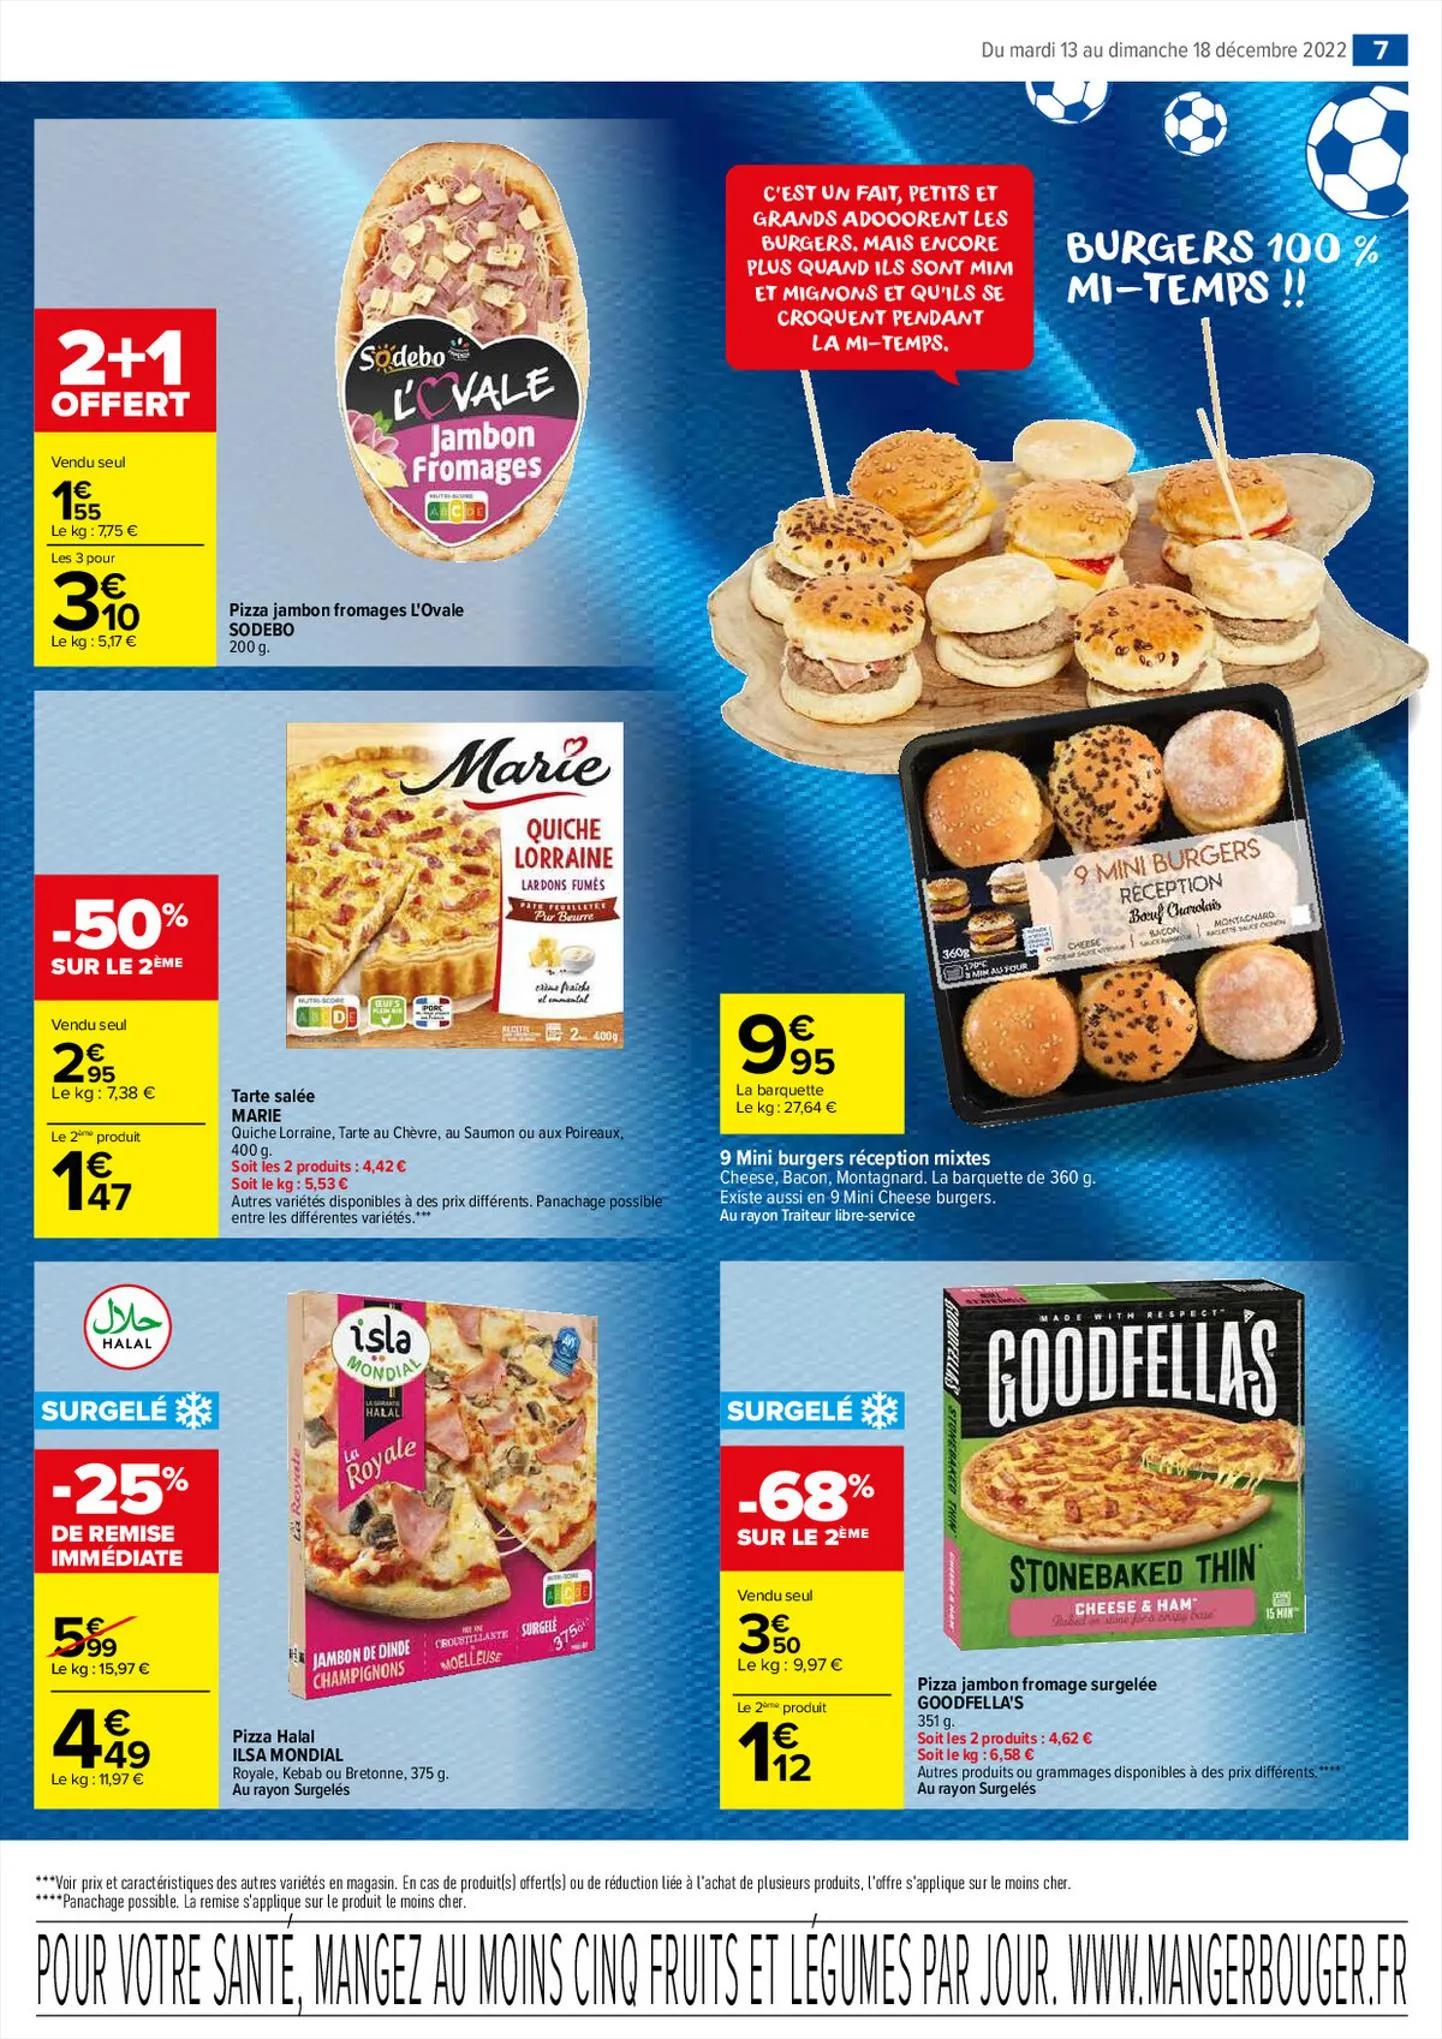 Catalogue Carrefour Supporter des Supporters, page 00007